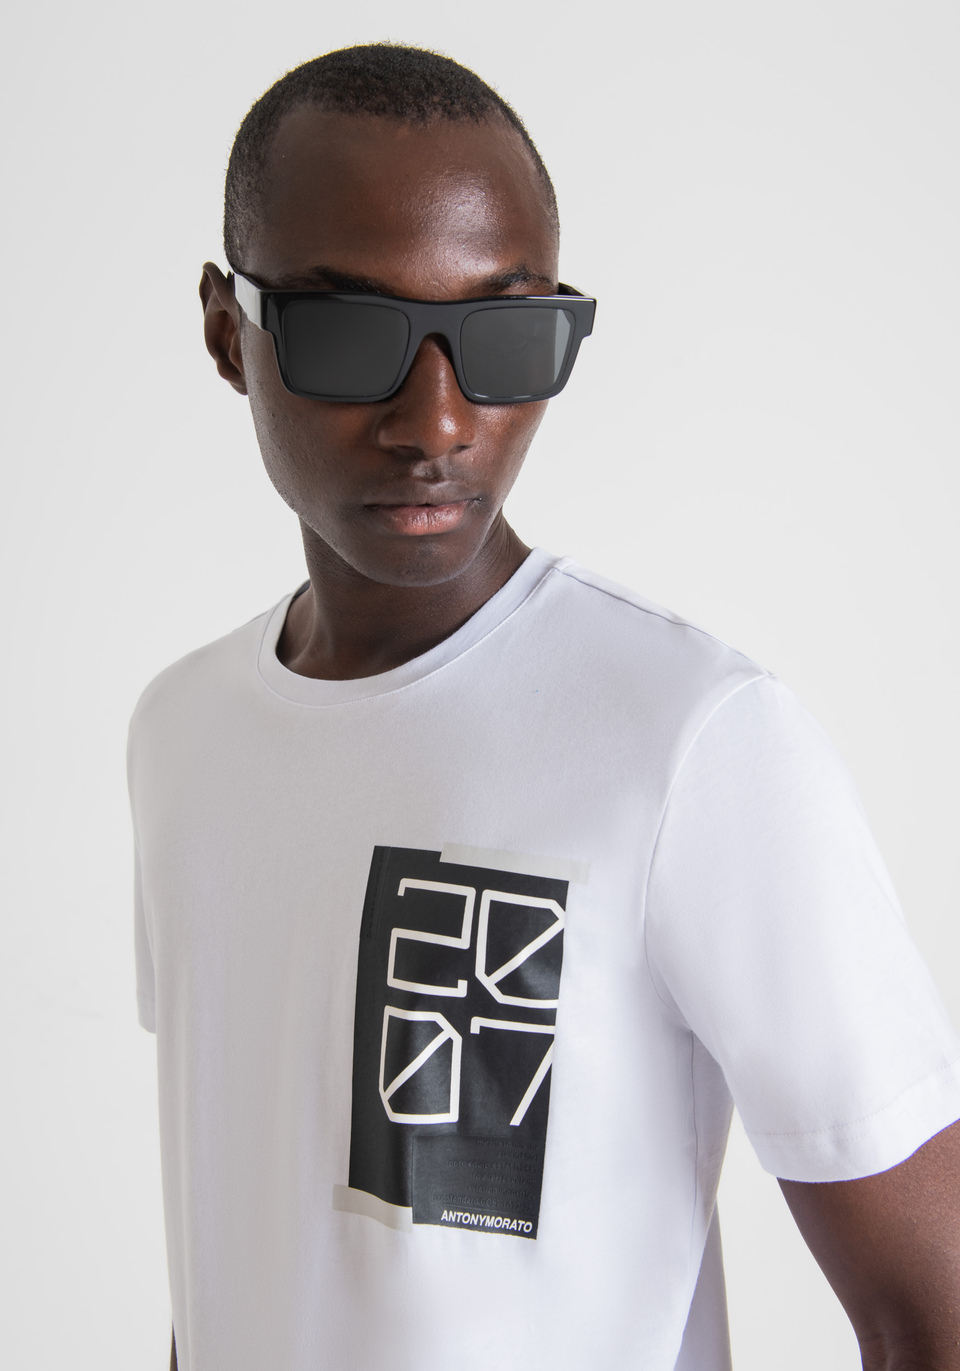 SLIM FIT T-SHIRT IN PURE COTTON WITH RUBBERISED PRINT - Antony Morato Online Shop